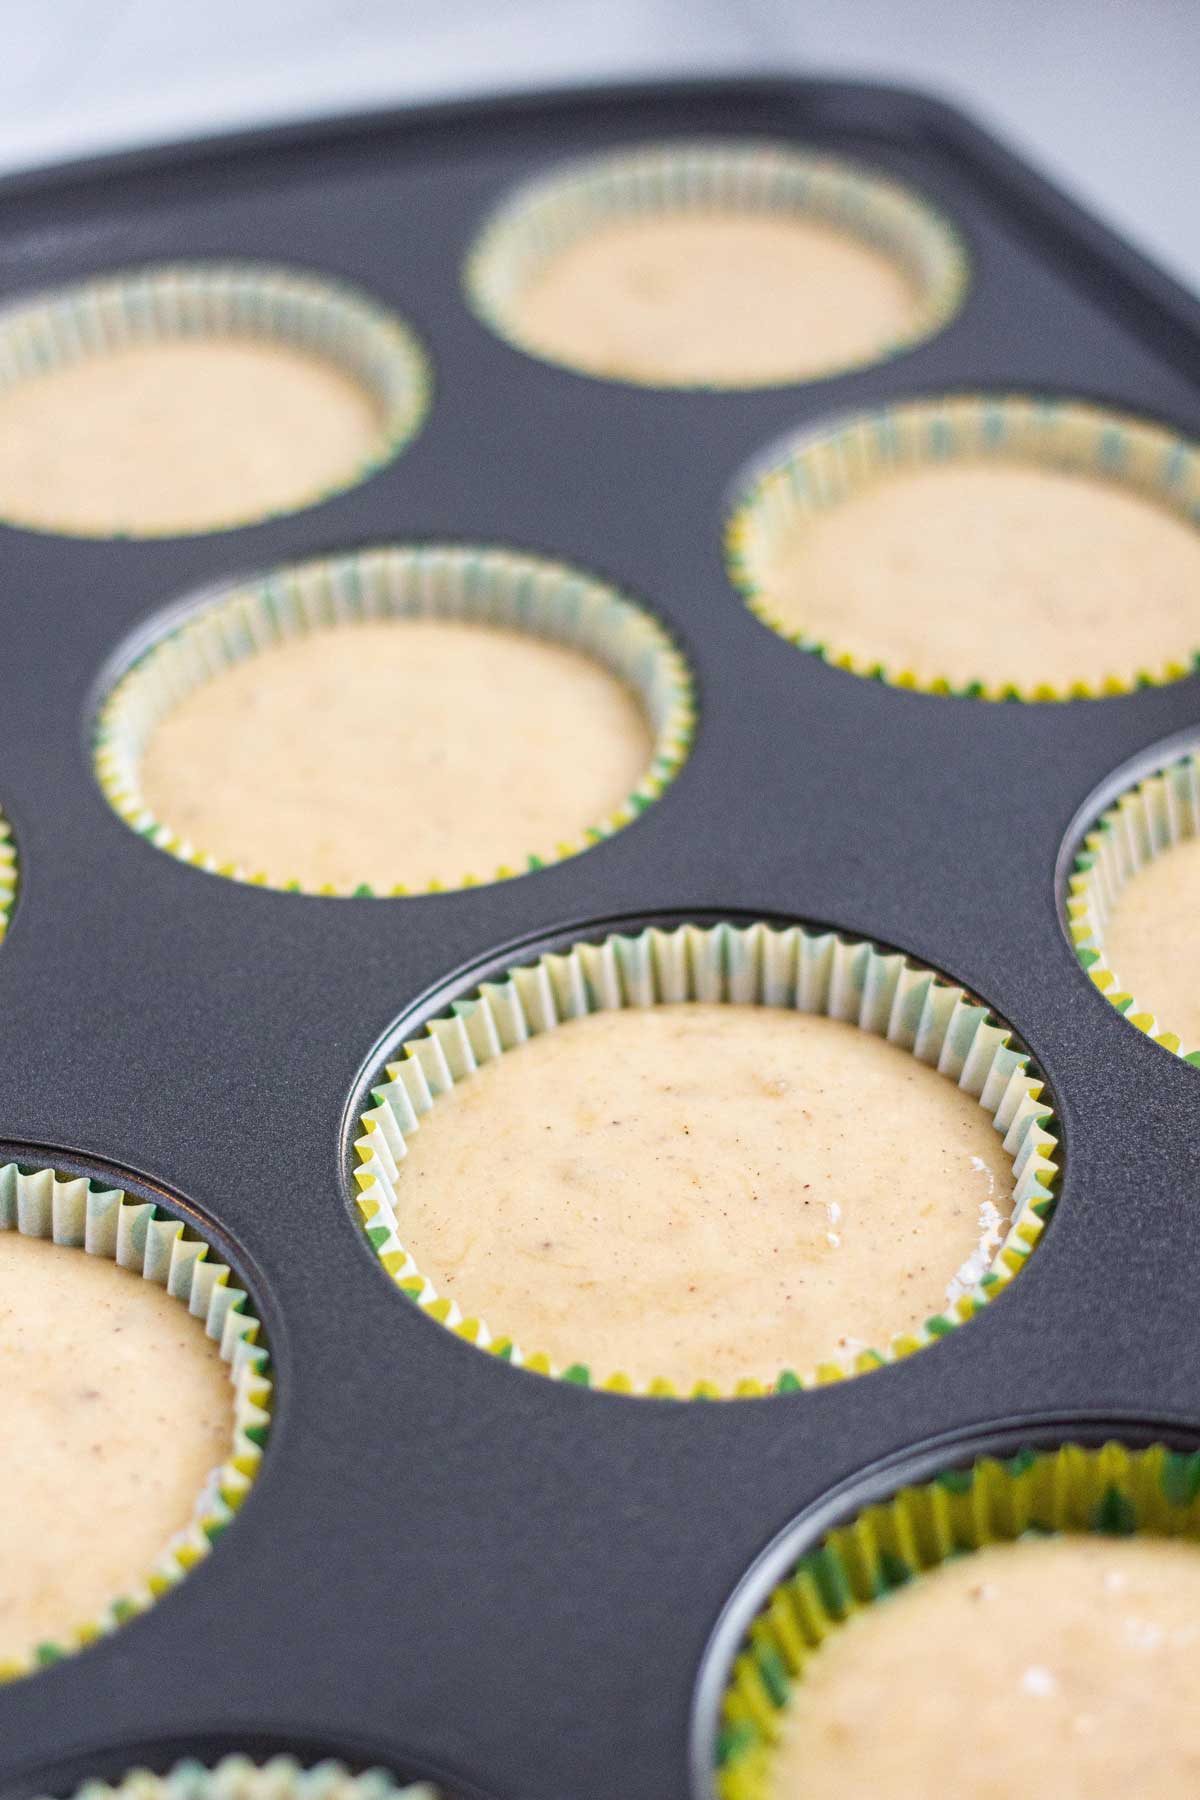 Muffin batter in baking cup inside a muffin baking pan.